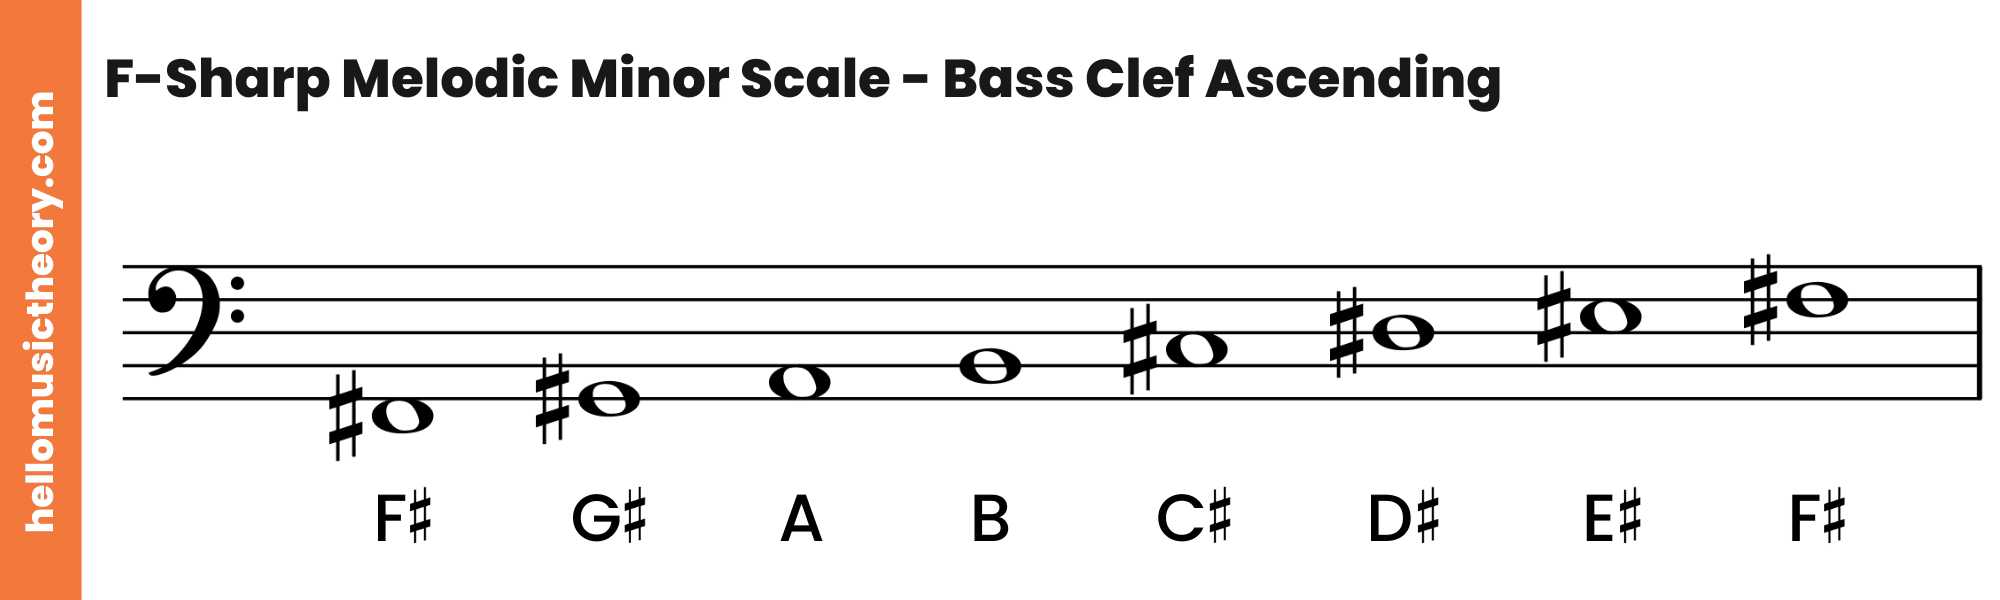 F-Sharp Melodic Minor Scale Bass Clef Ascending